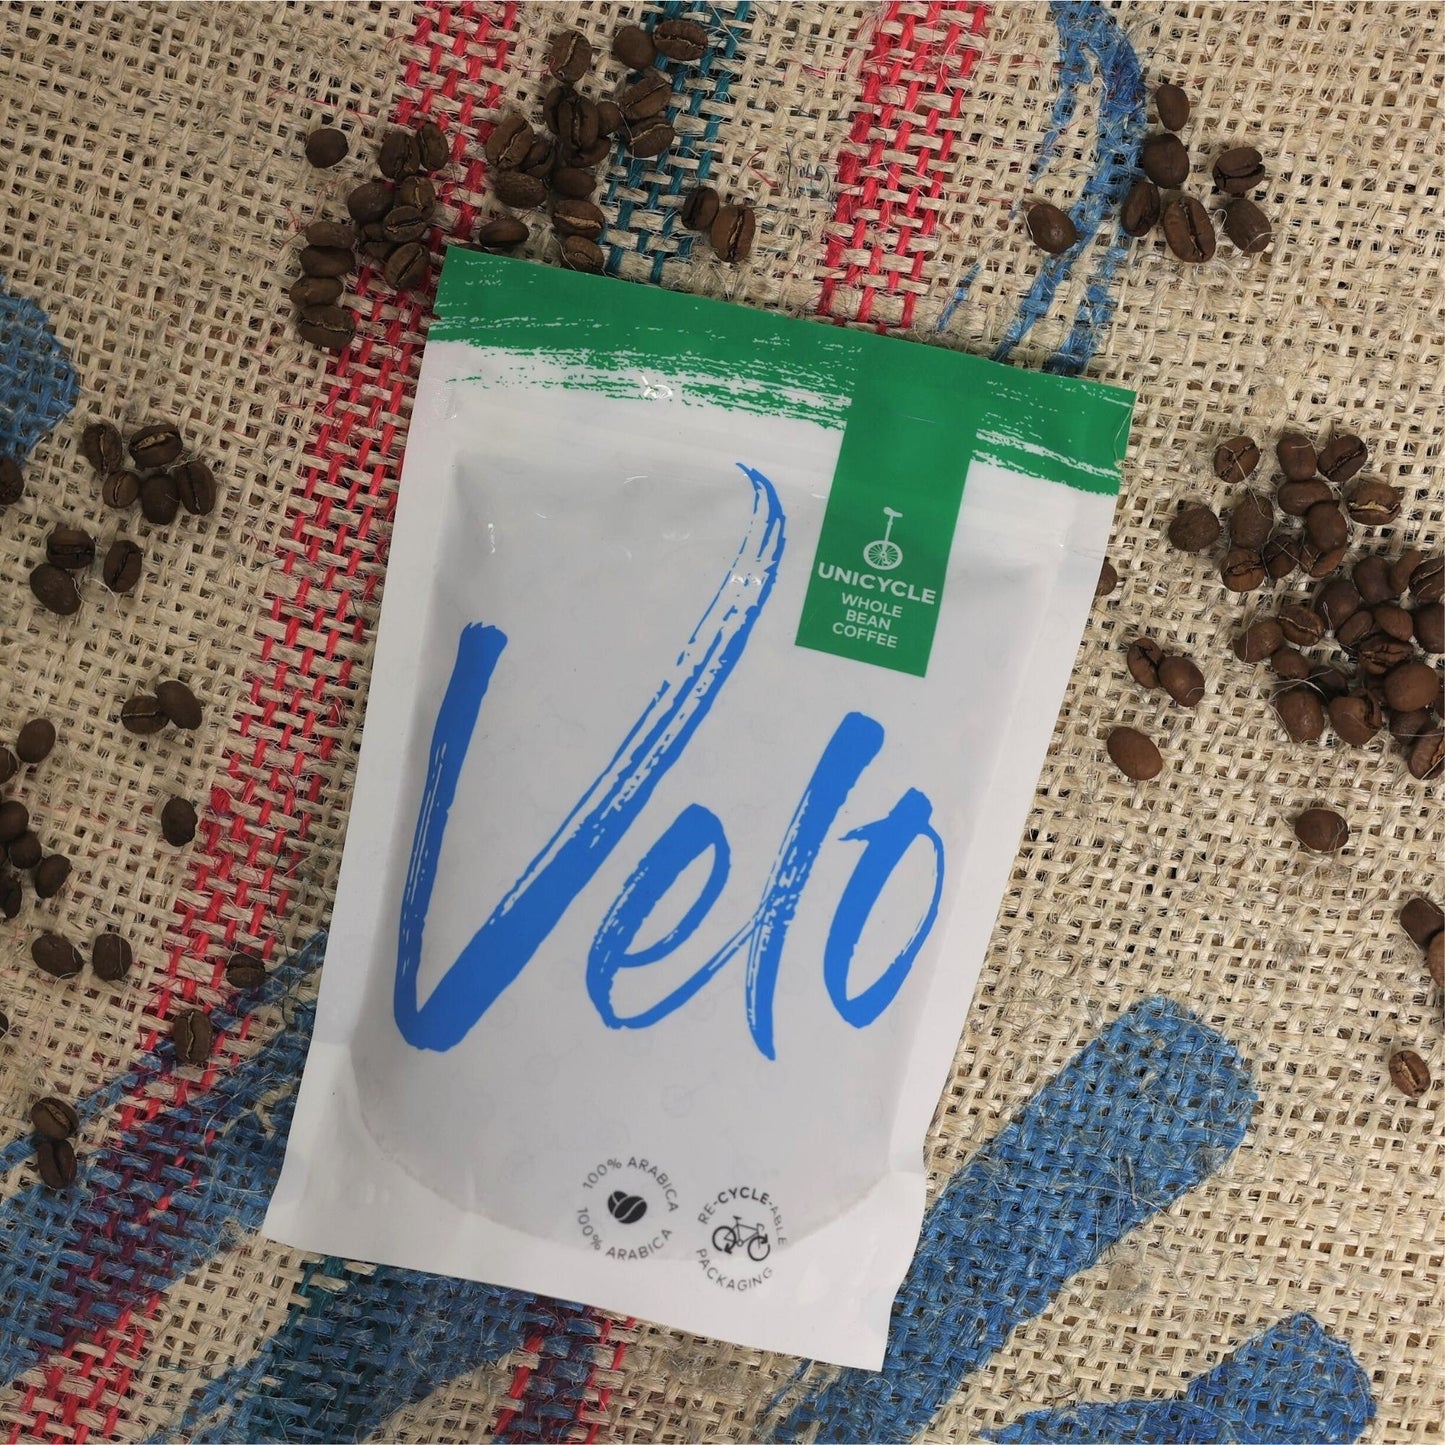 Load image into Gallery viewer, Mexico Innovation Extended Fermentation 200g Coffee Bag Mexico - Velo Coffee Roasters
